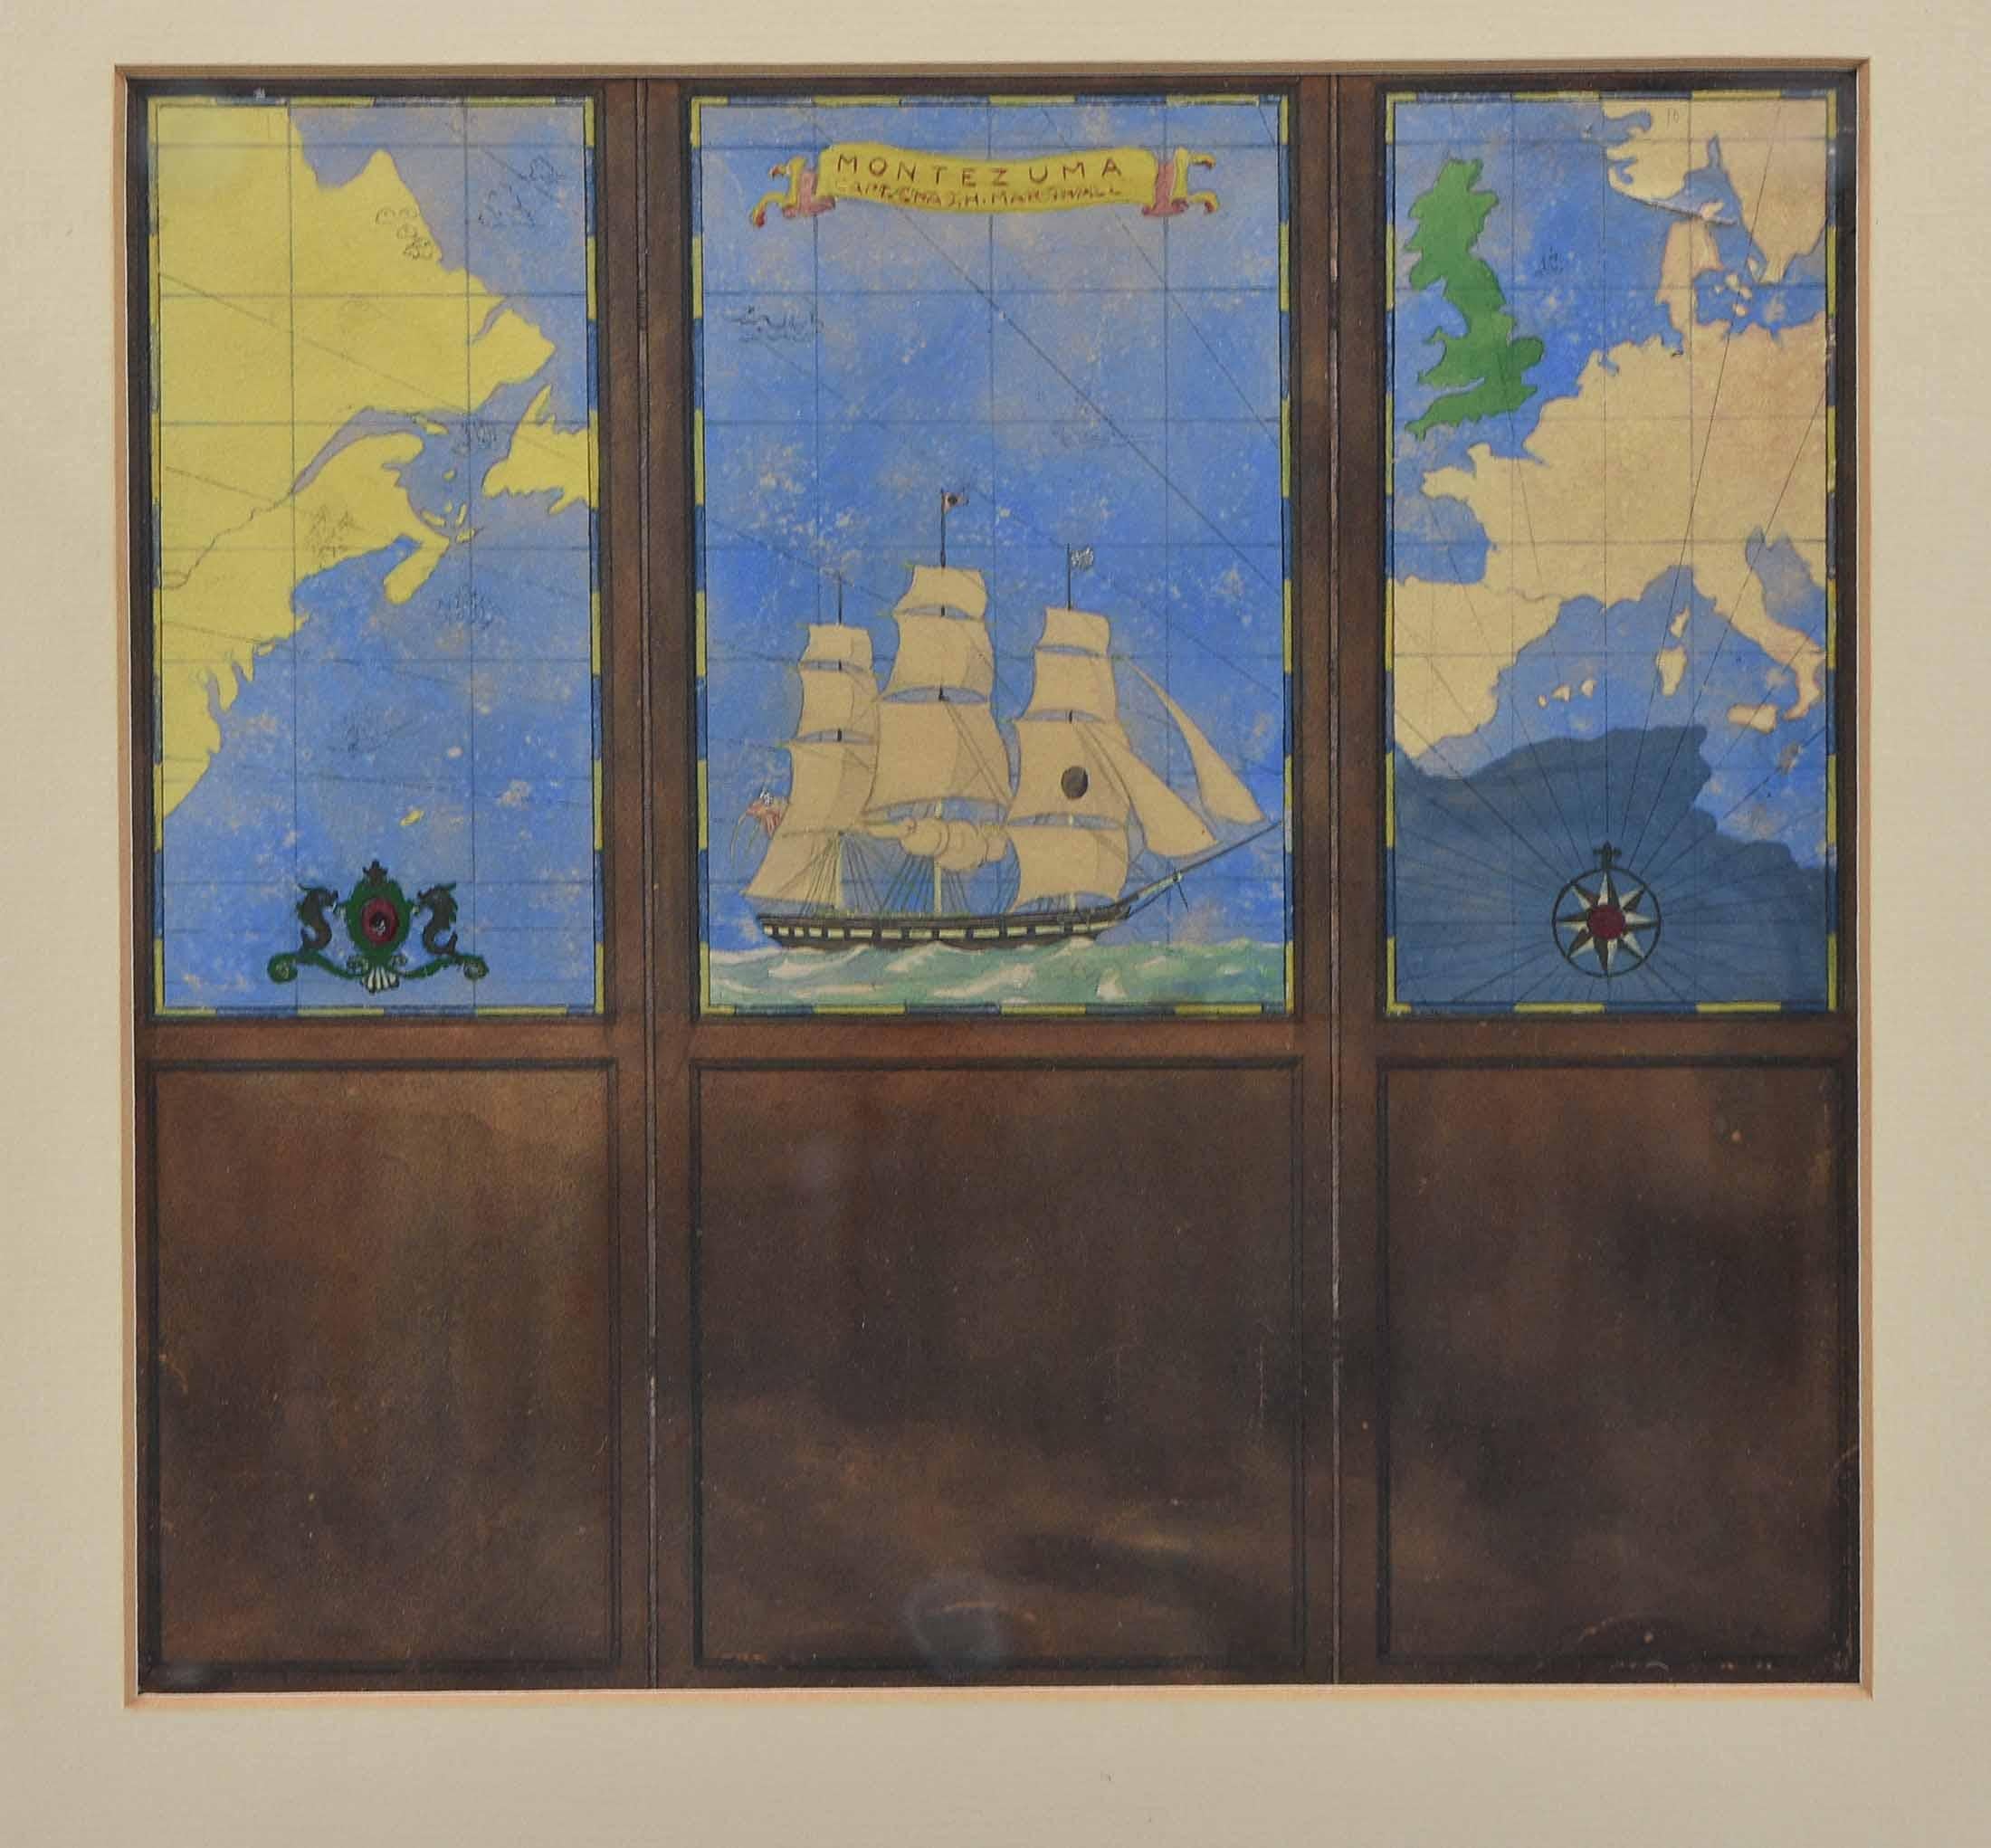 A watercolour drawing of a three-fold screen design, depicting a nautical map of the Atlantic showing America and Europe, and centred with a three-masted ship 'Montezuma' - Kenneth Stevens MacIntire (American, 1891-1979).

Delivery is INCLUDED for